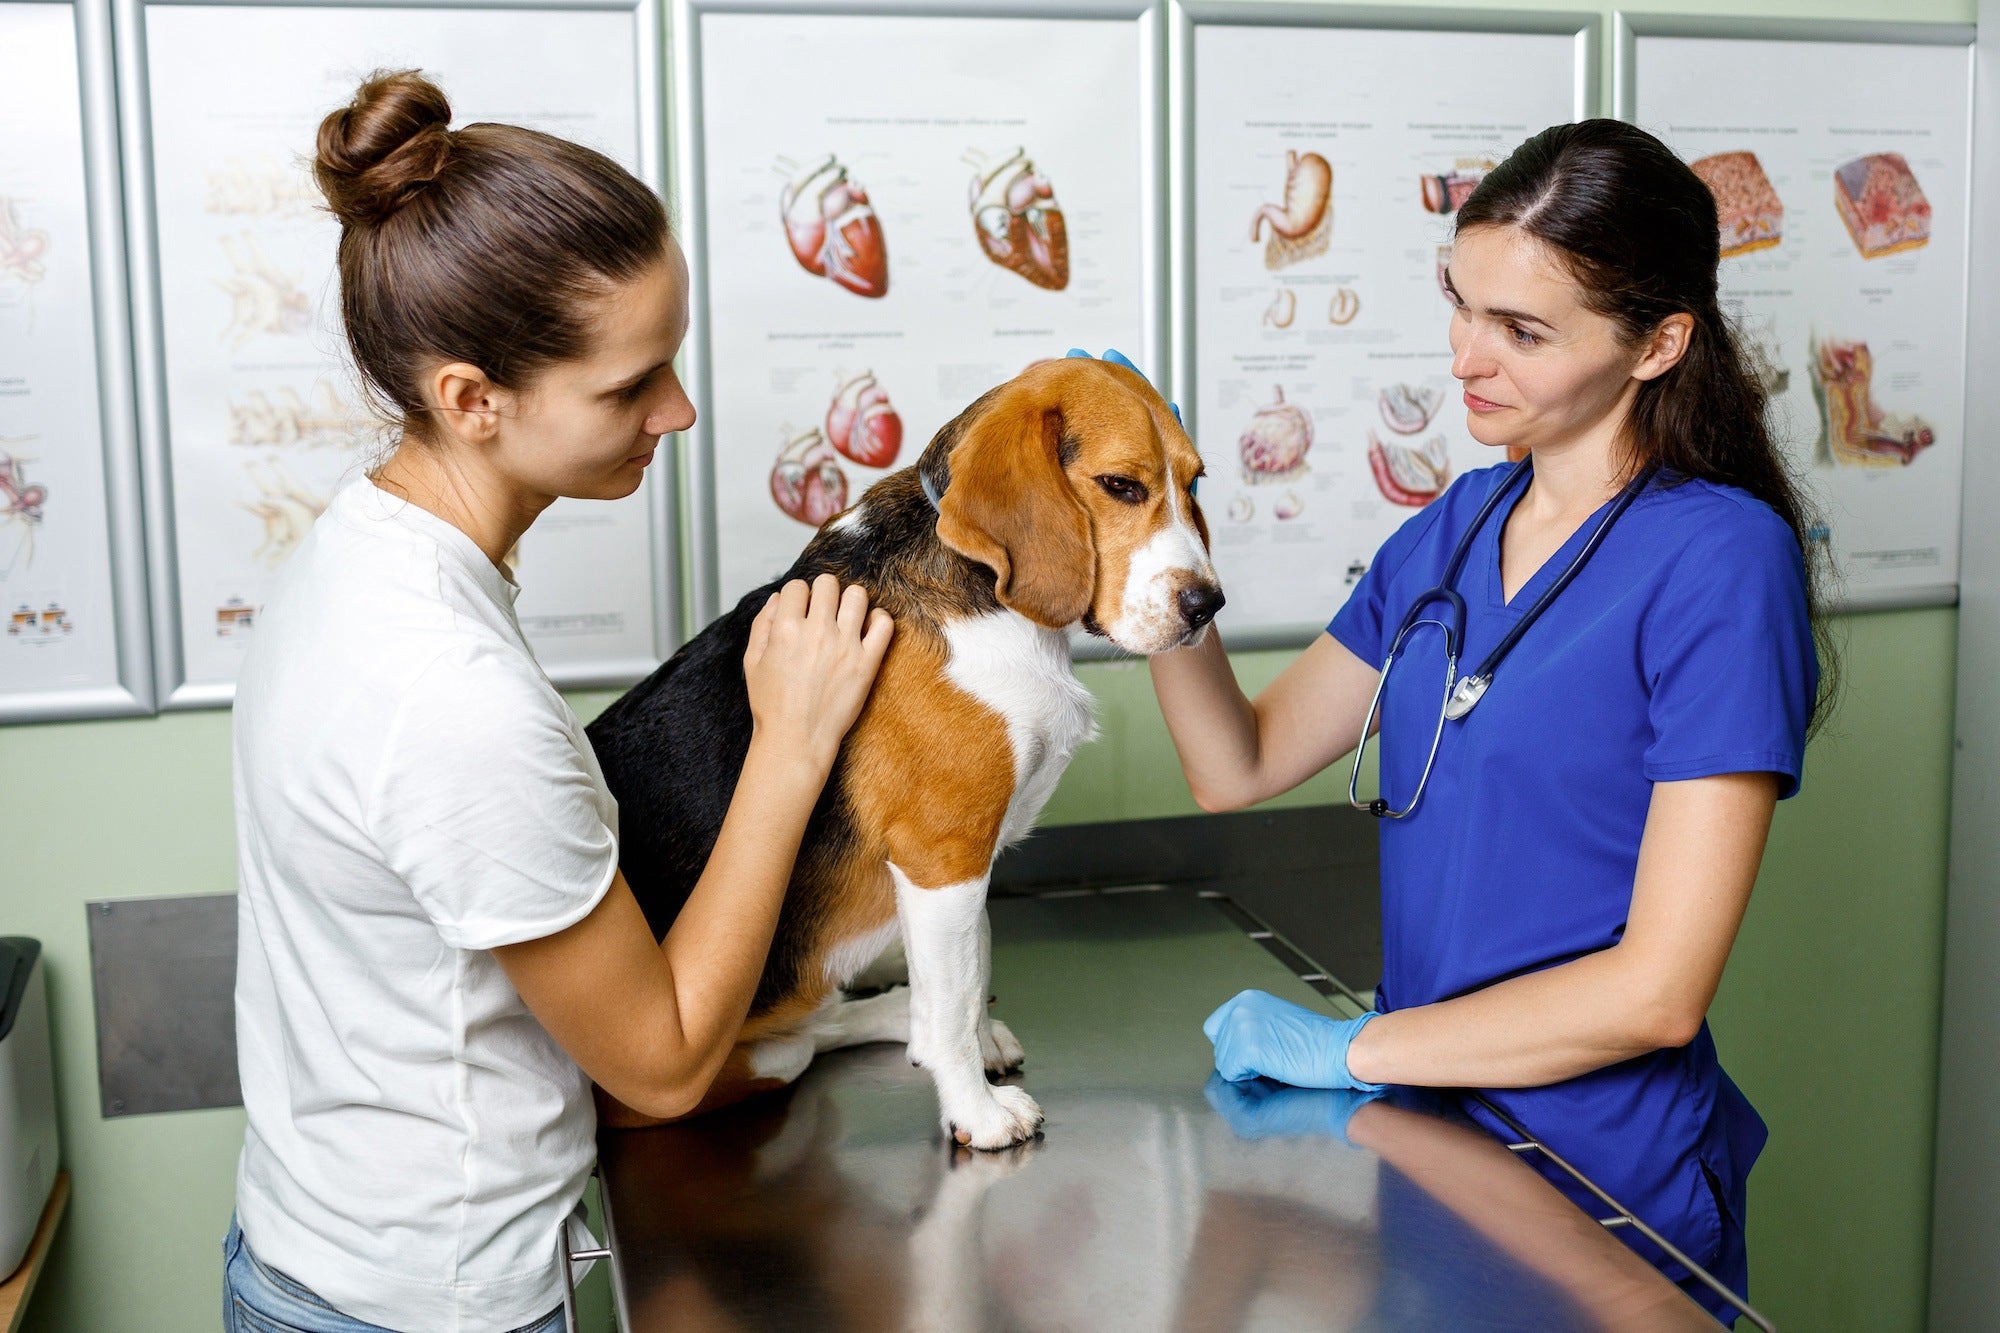 Goddard Veterinary Group Chalfont St Peter: Providing Excellence in Pet Care